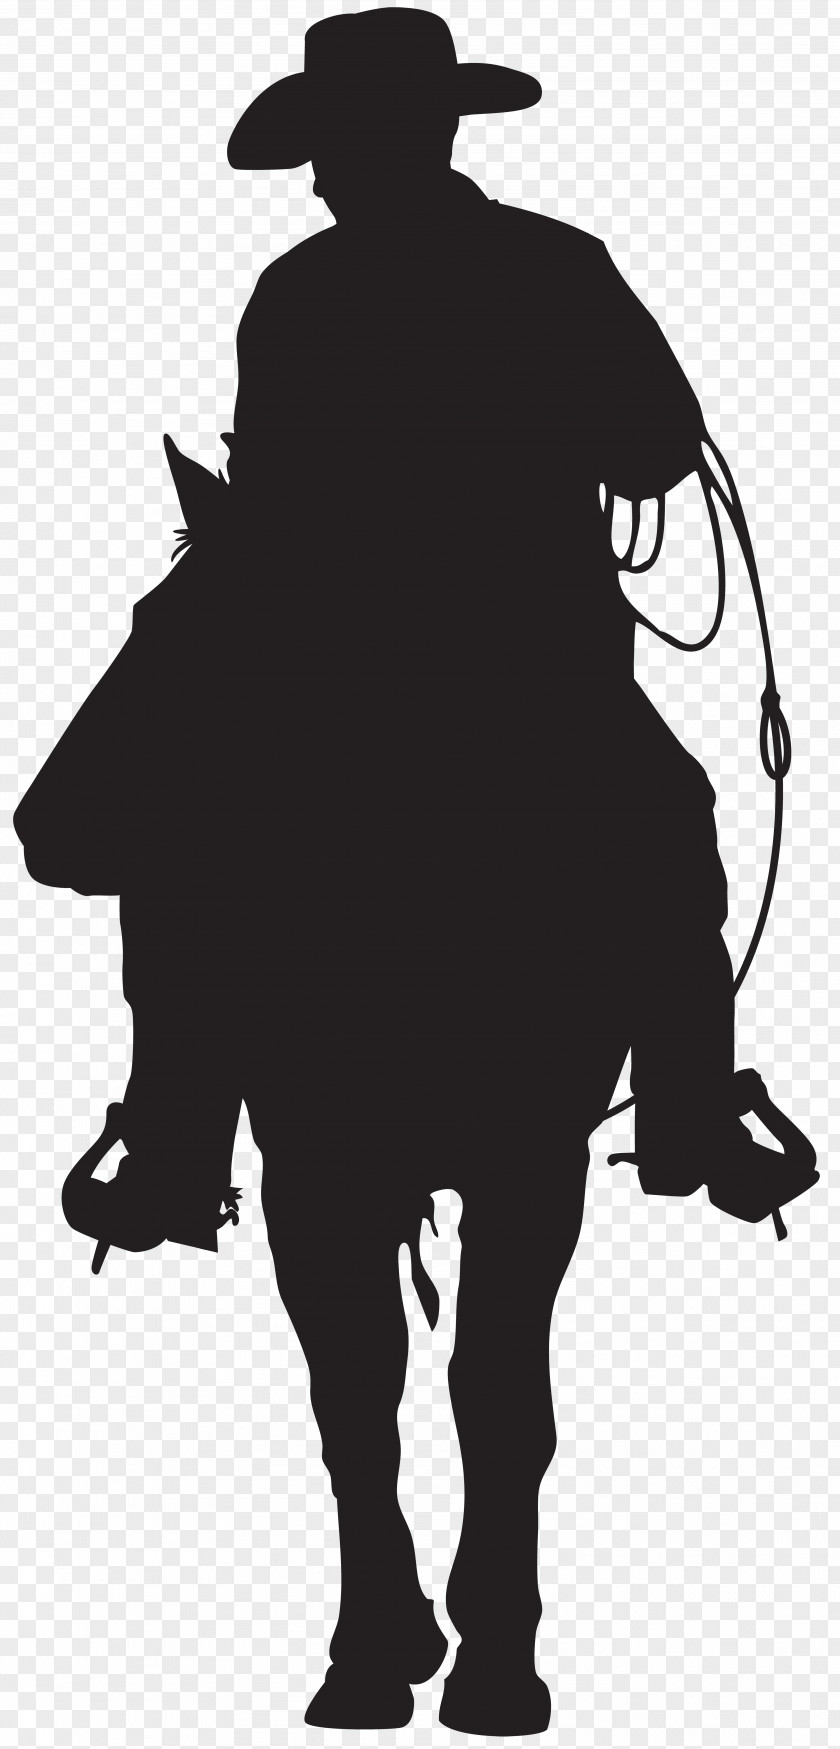 Cowboy American Frontier Silhouette Clip Art PNG